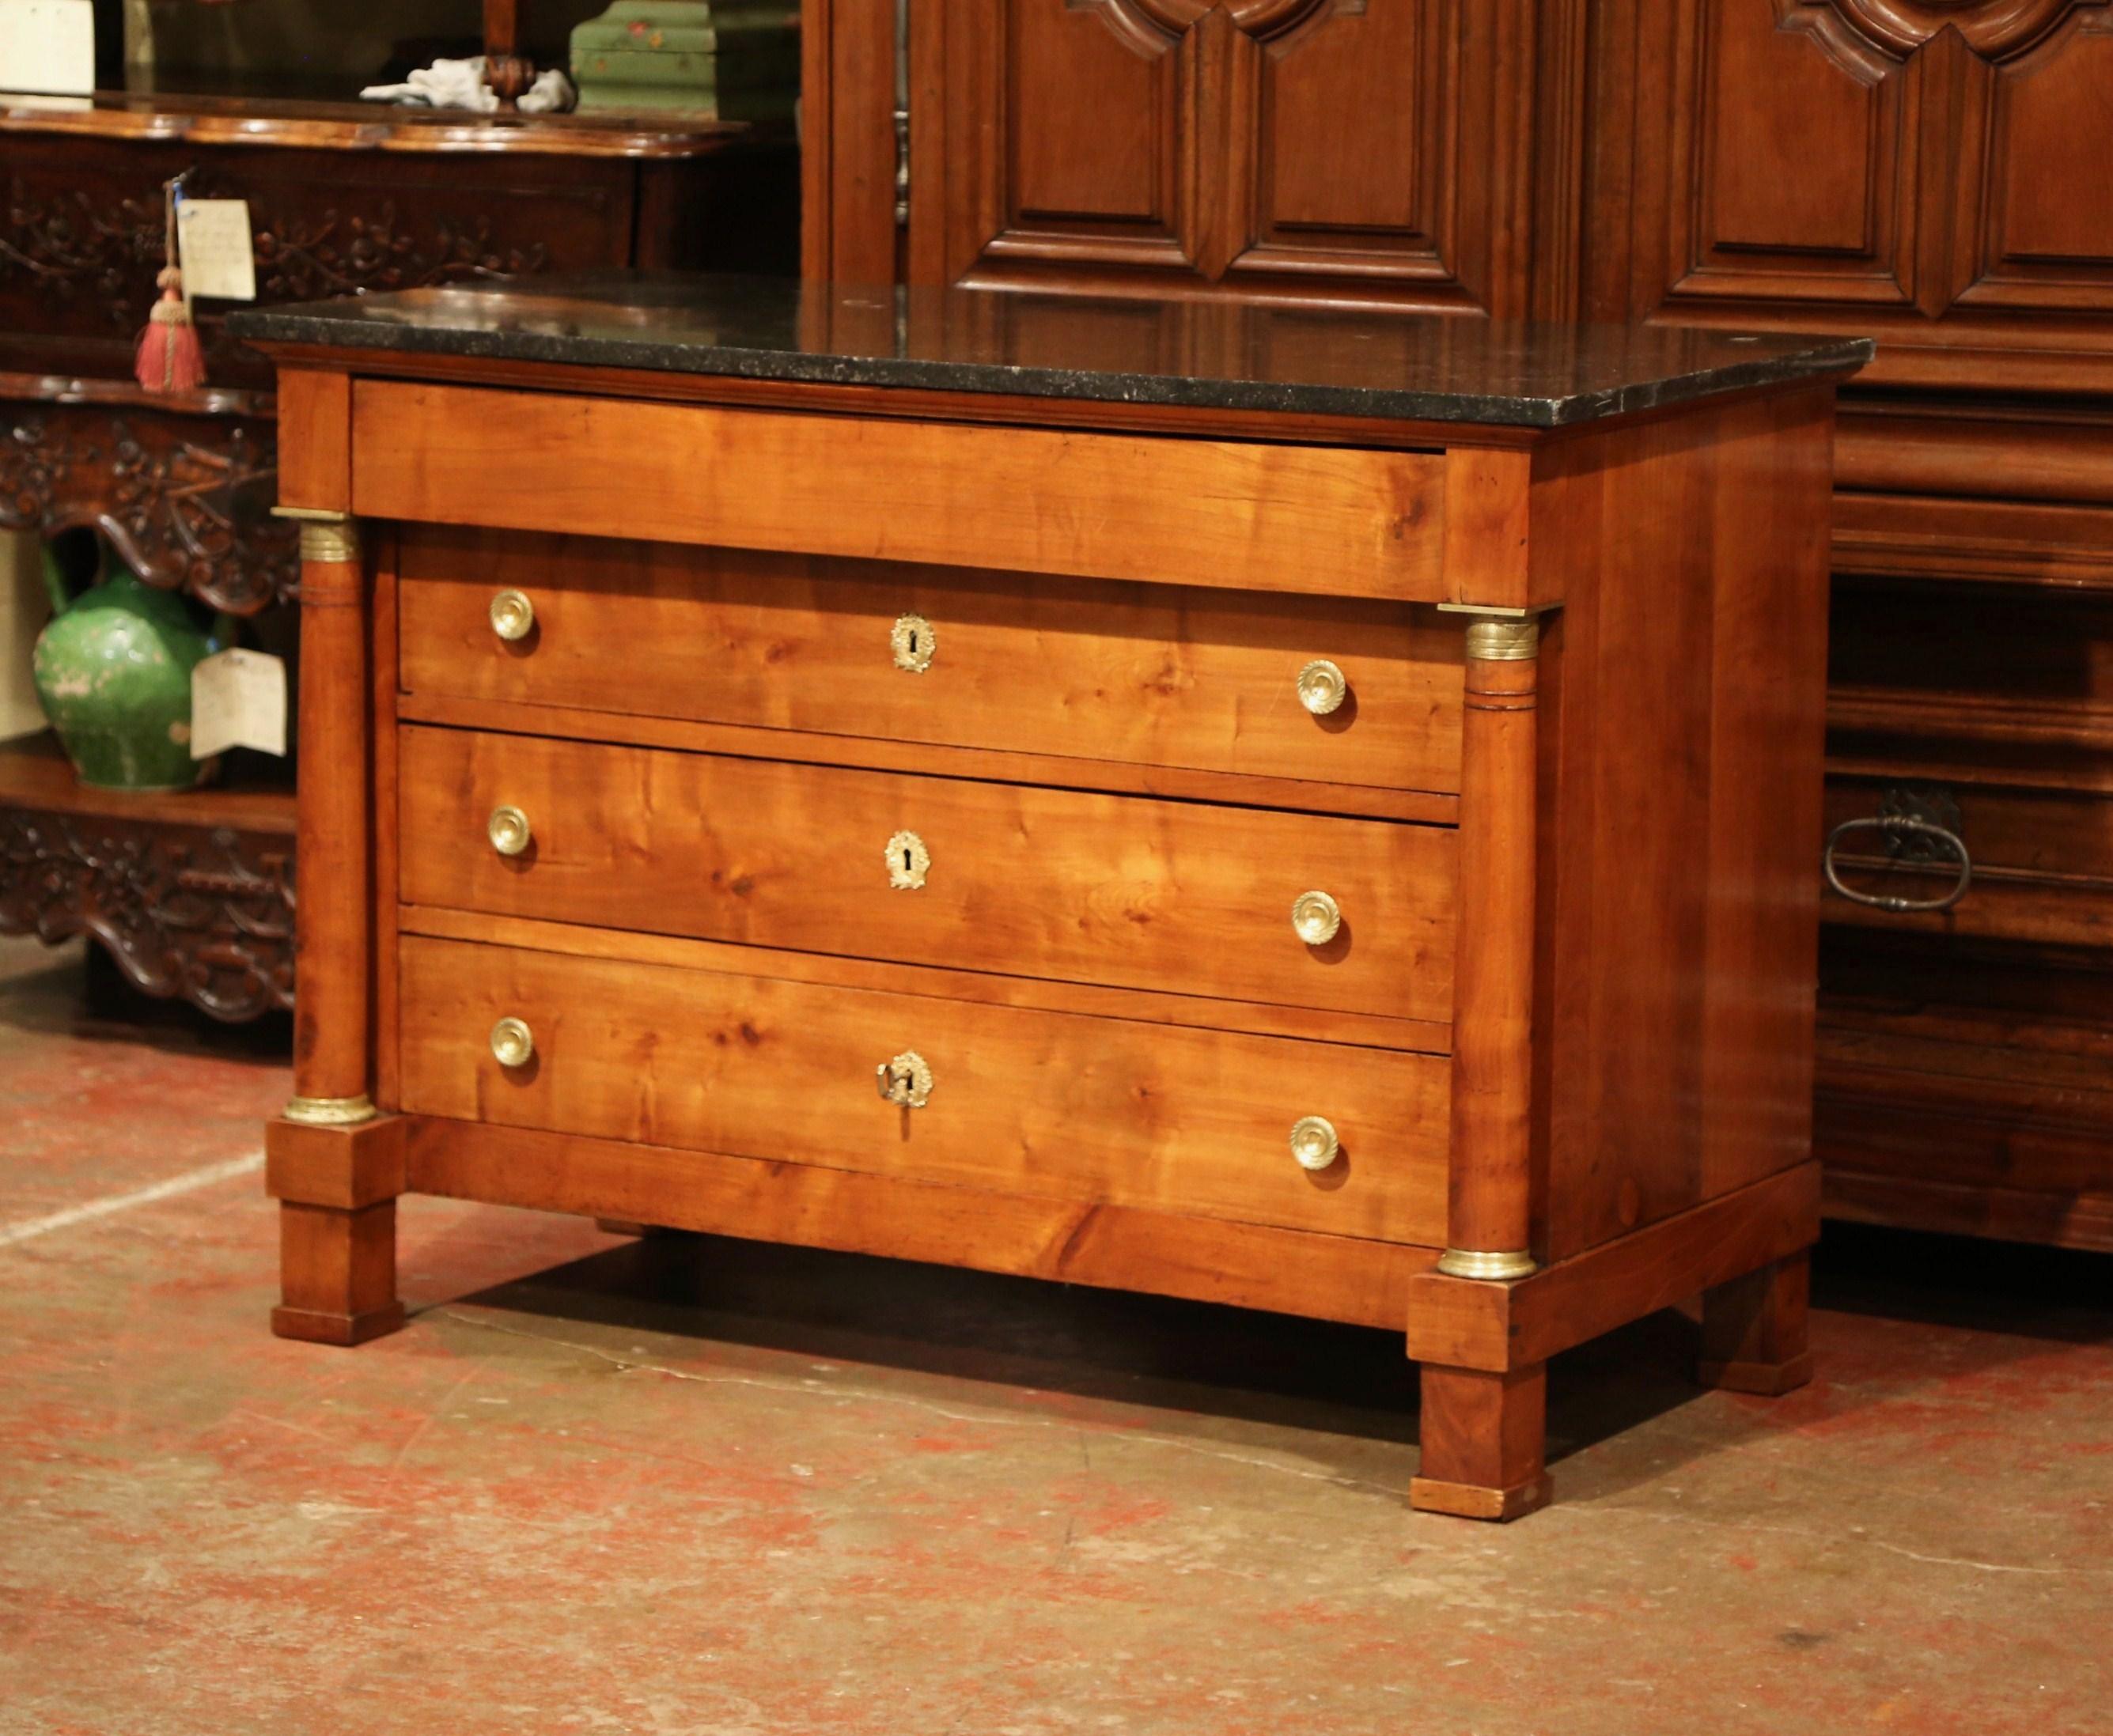 Bronze 19th Century French Empire Walnut Commode Chest of Drawers with Black Marble Top